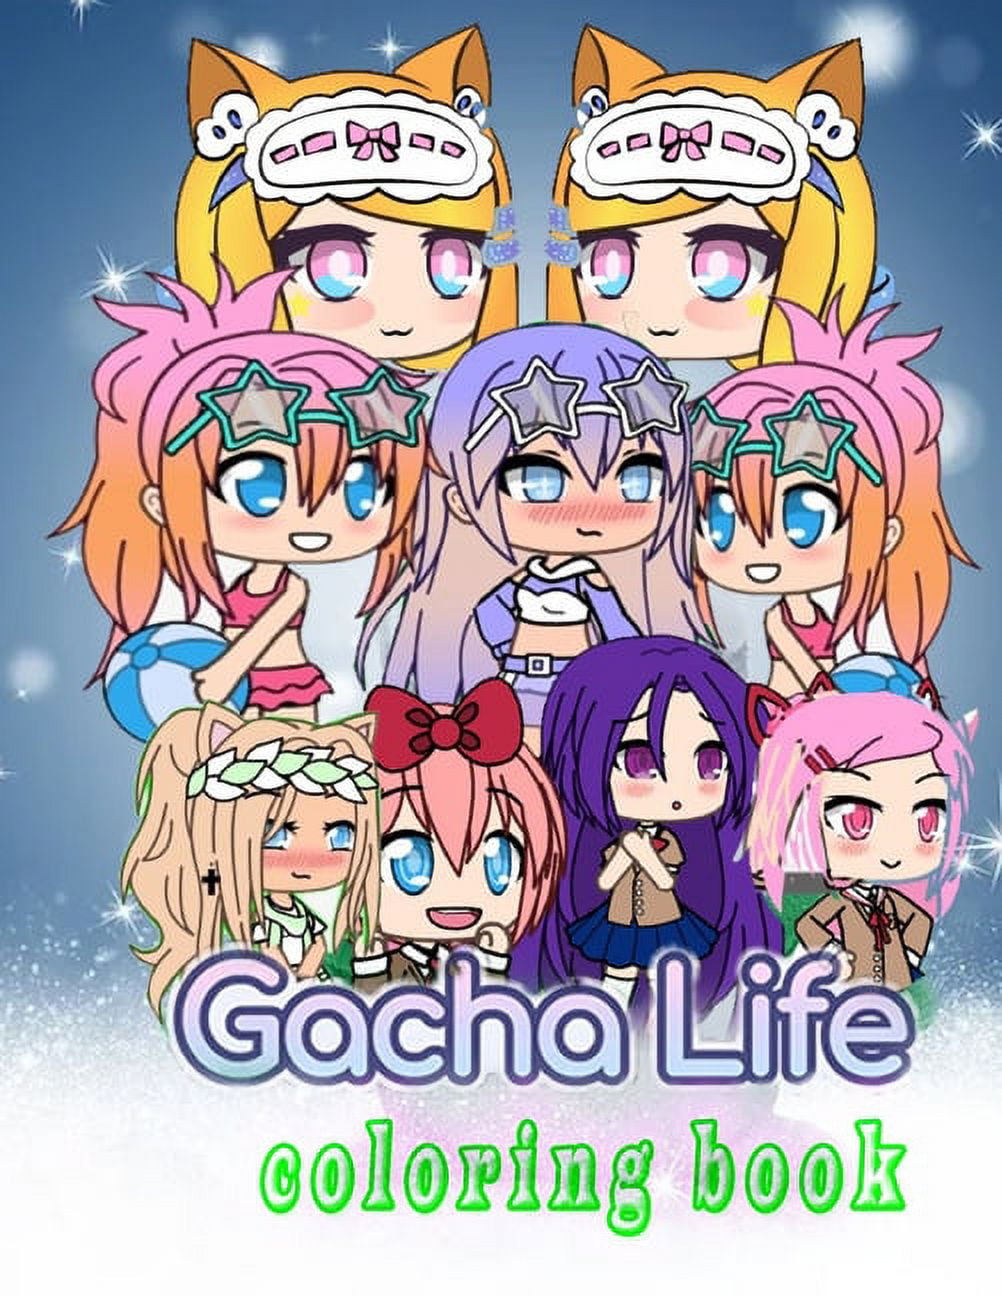 Gacha life love part 3 - Free stories online. Create books for kids